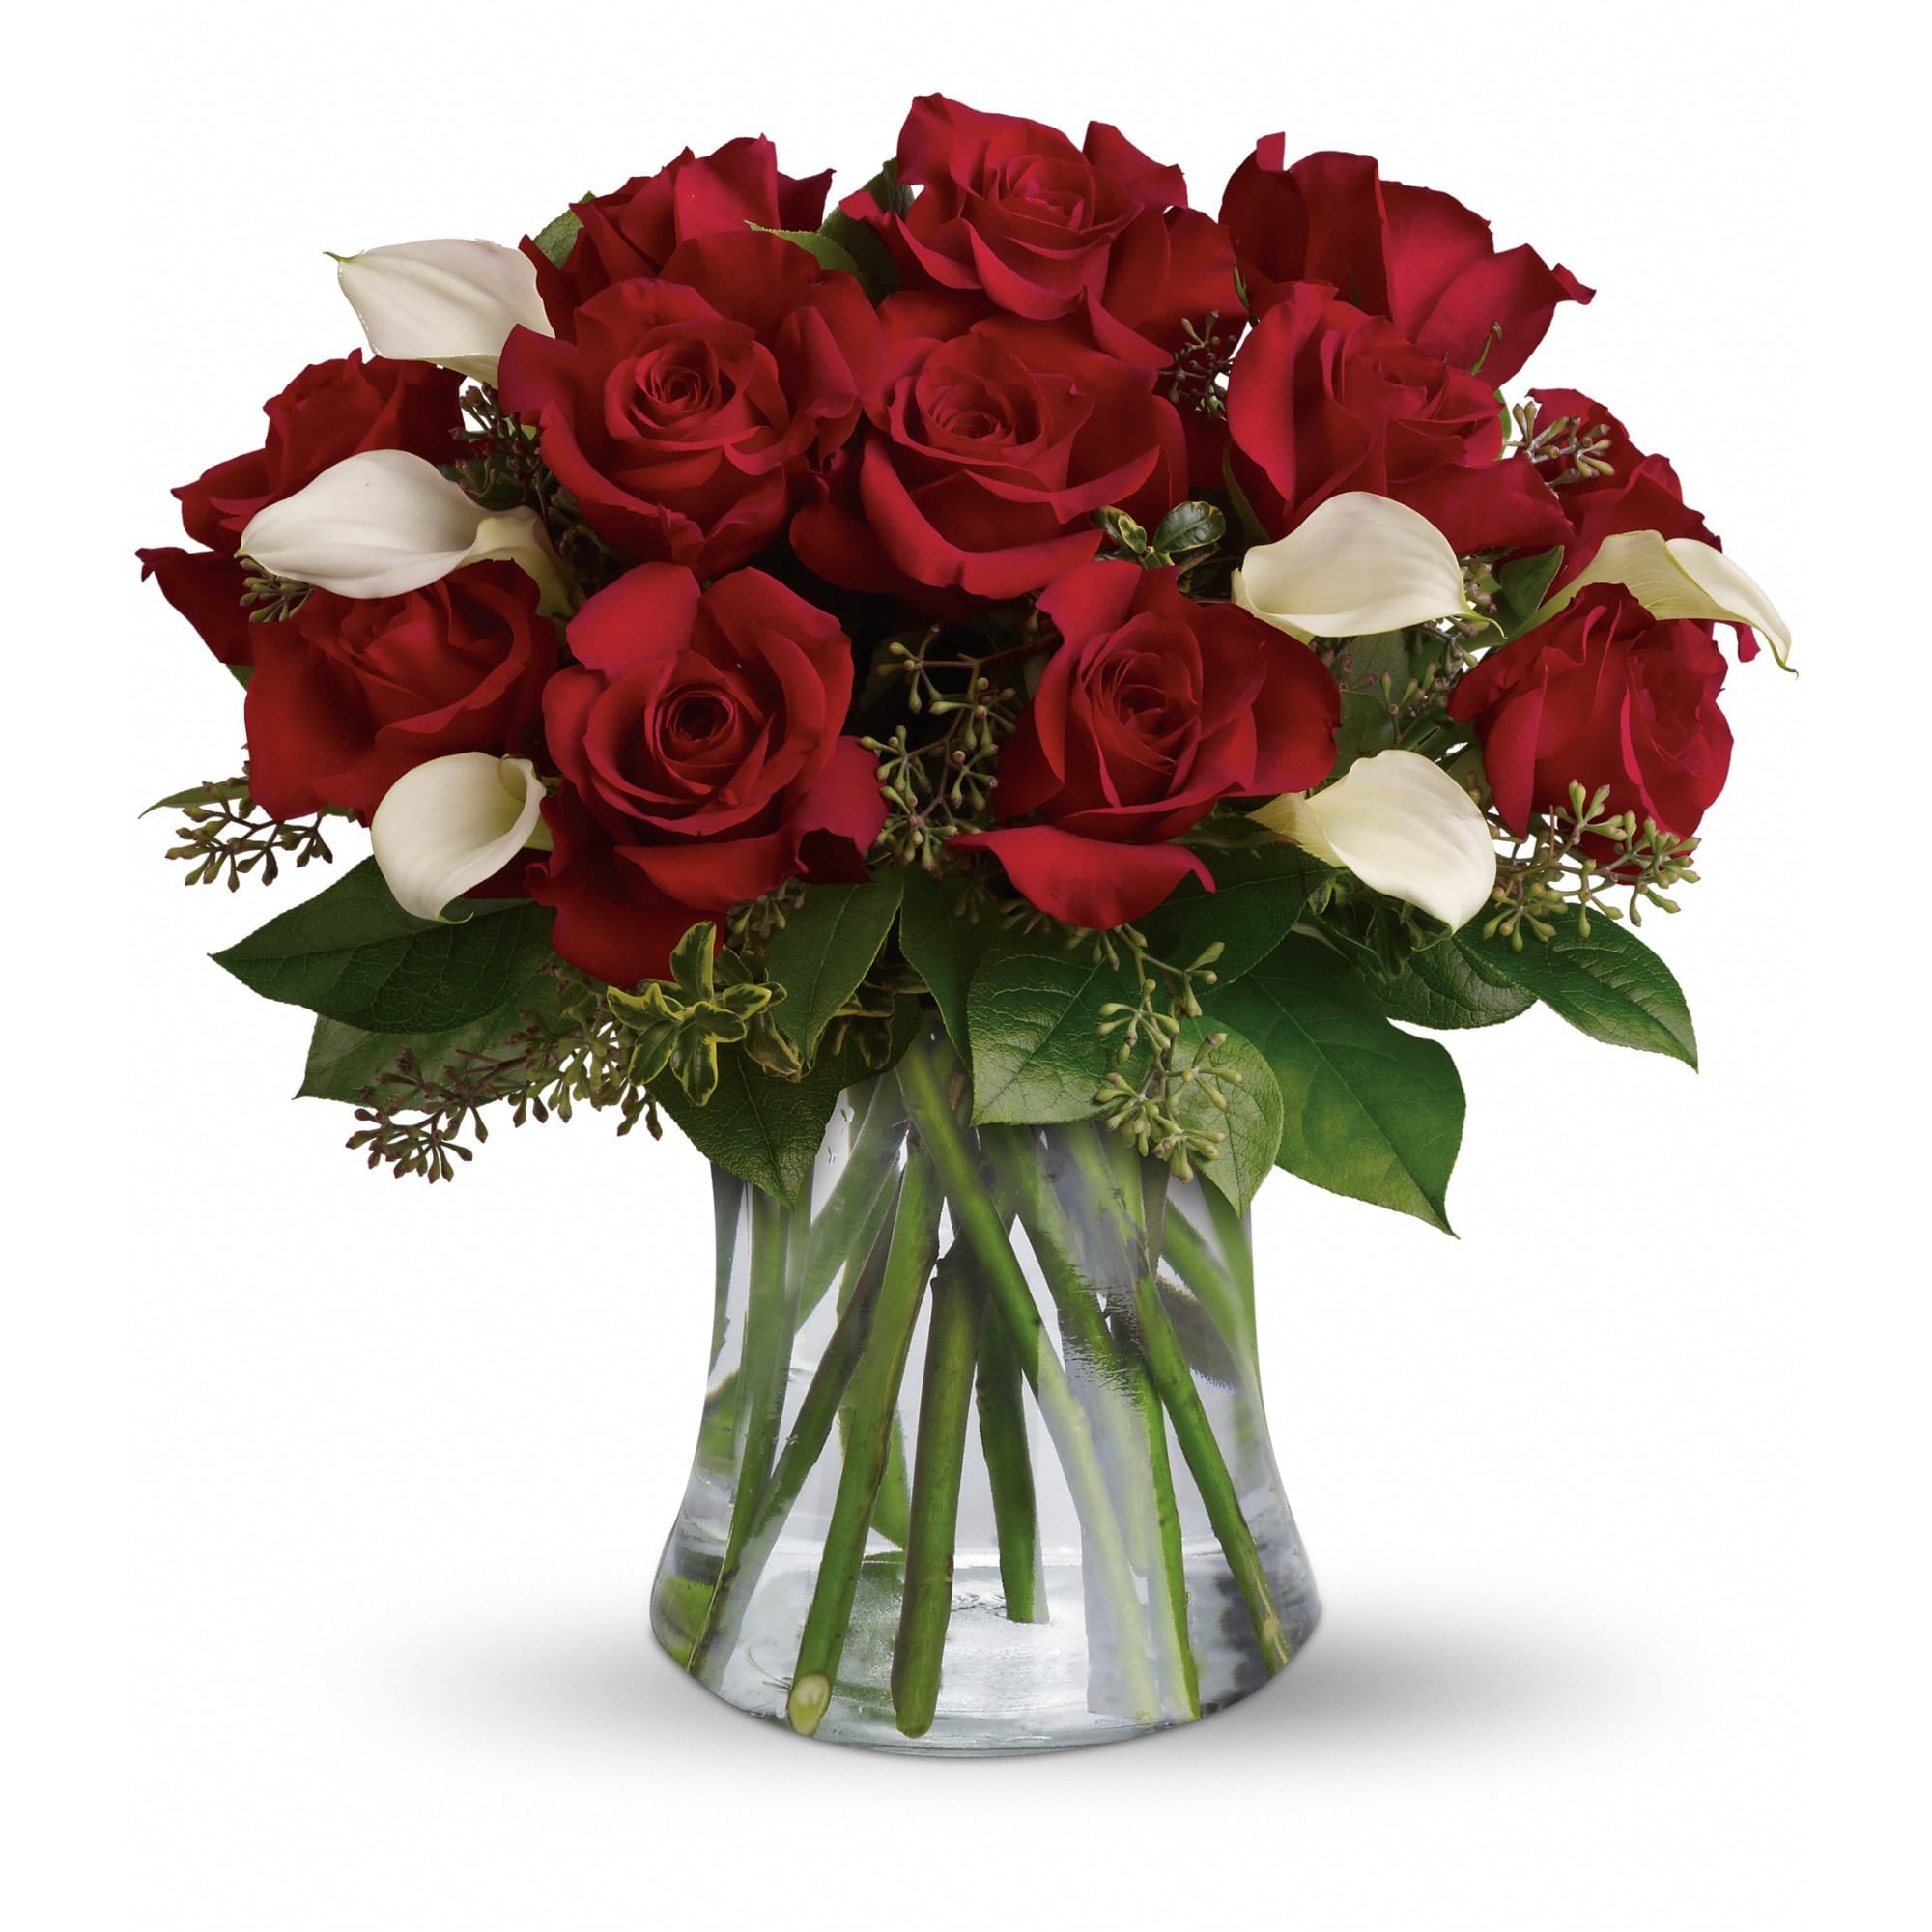 Be Still My Heart - Dozen Red Roses  - The look of love is charmingly reflected in this romantic array of red roses and fragrant white callas. Beautifully presented in a sparkling glass vase, these gorgeous flowers will say what's in your heart more eloquently than words.  The gorgeous bouquet features one dozen red roses and a half dozen miniature white calla lilies accented with assorted greenery.  Approximately 15 1/2&quot; W x 15 1/2&quot; H  Orientation: All-Around      As Shown : TRS02-1A     Deluxe : TRS02-1B     Premium : TRS02-1C 